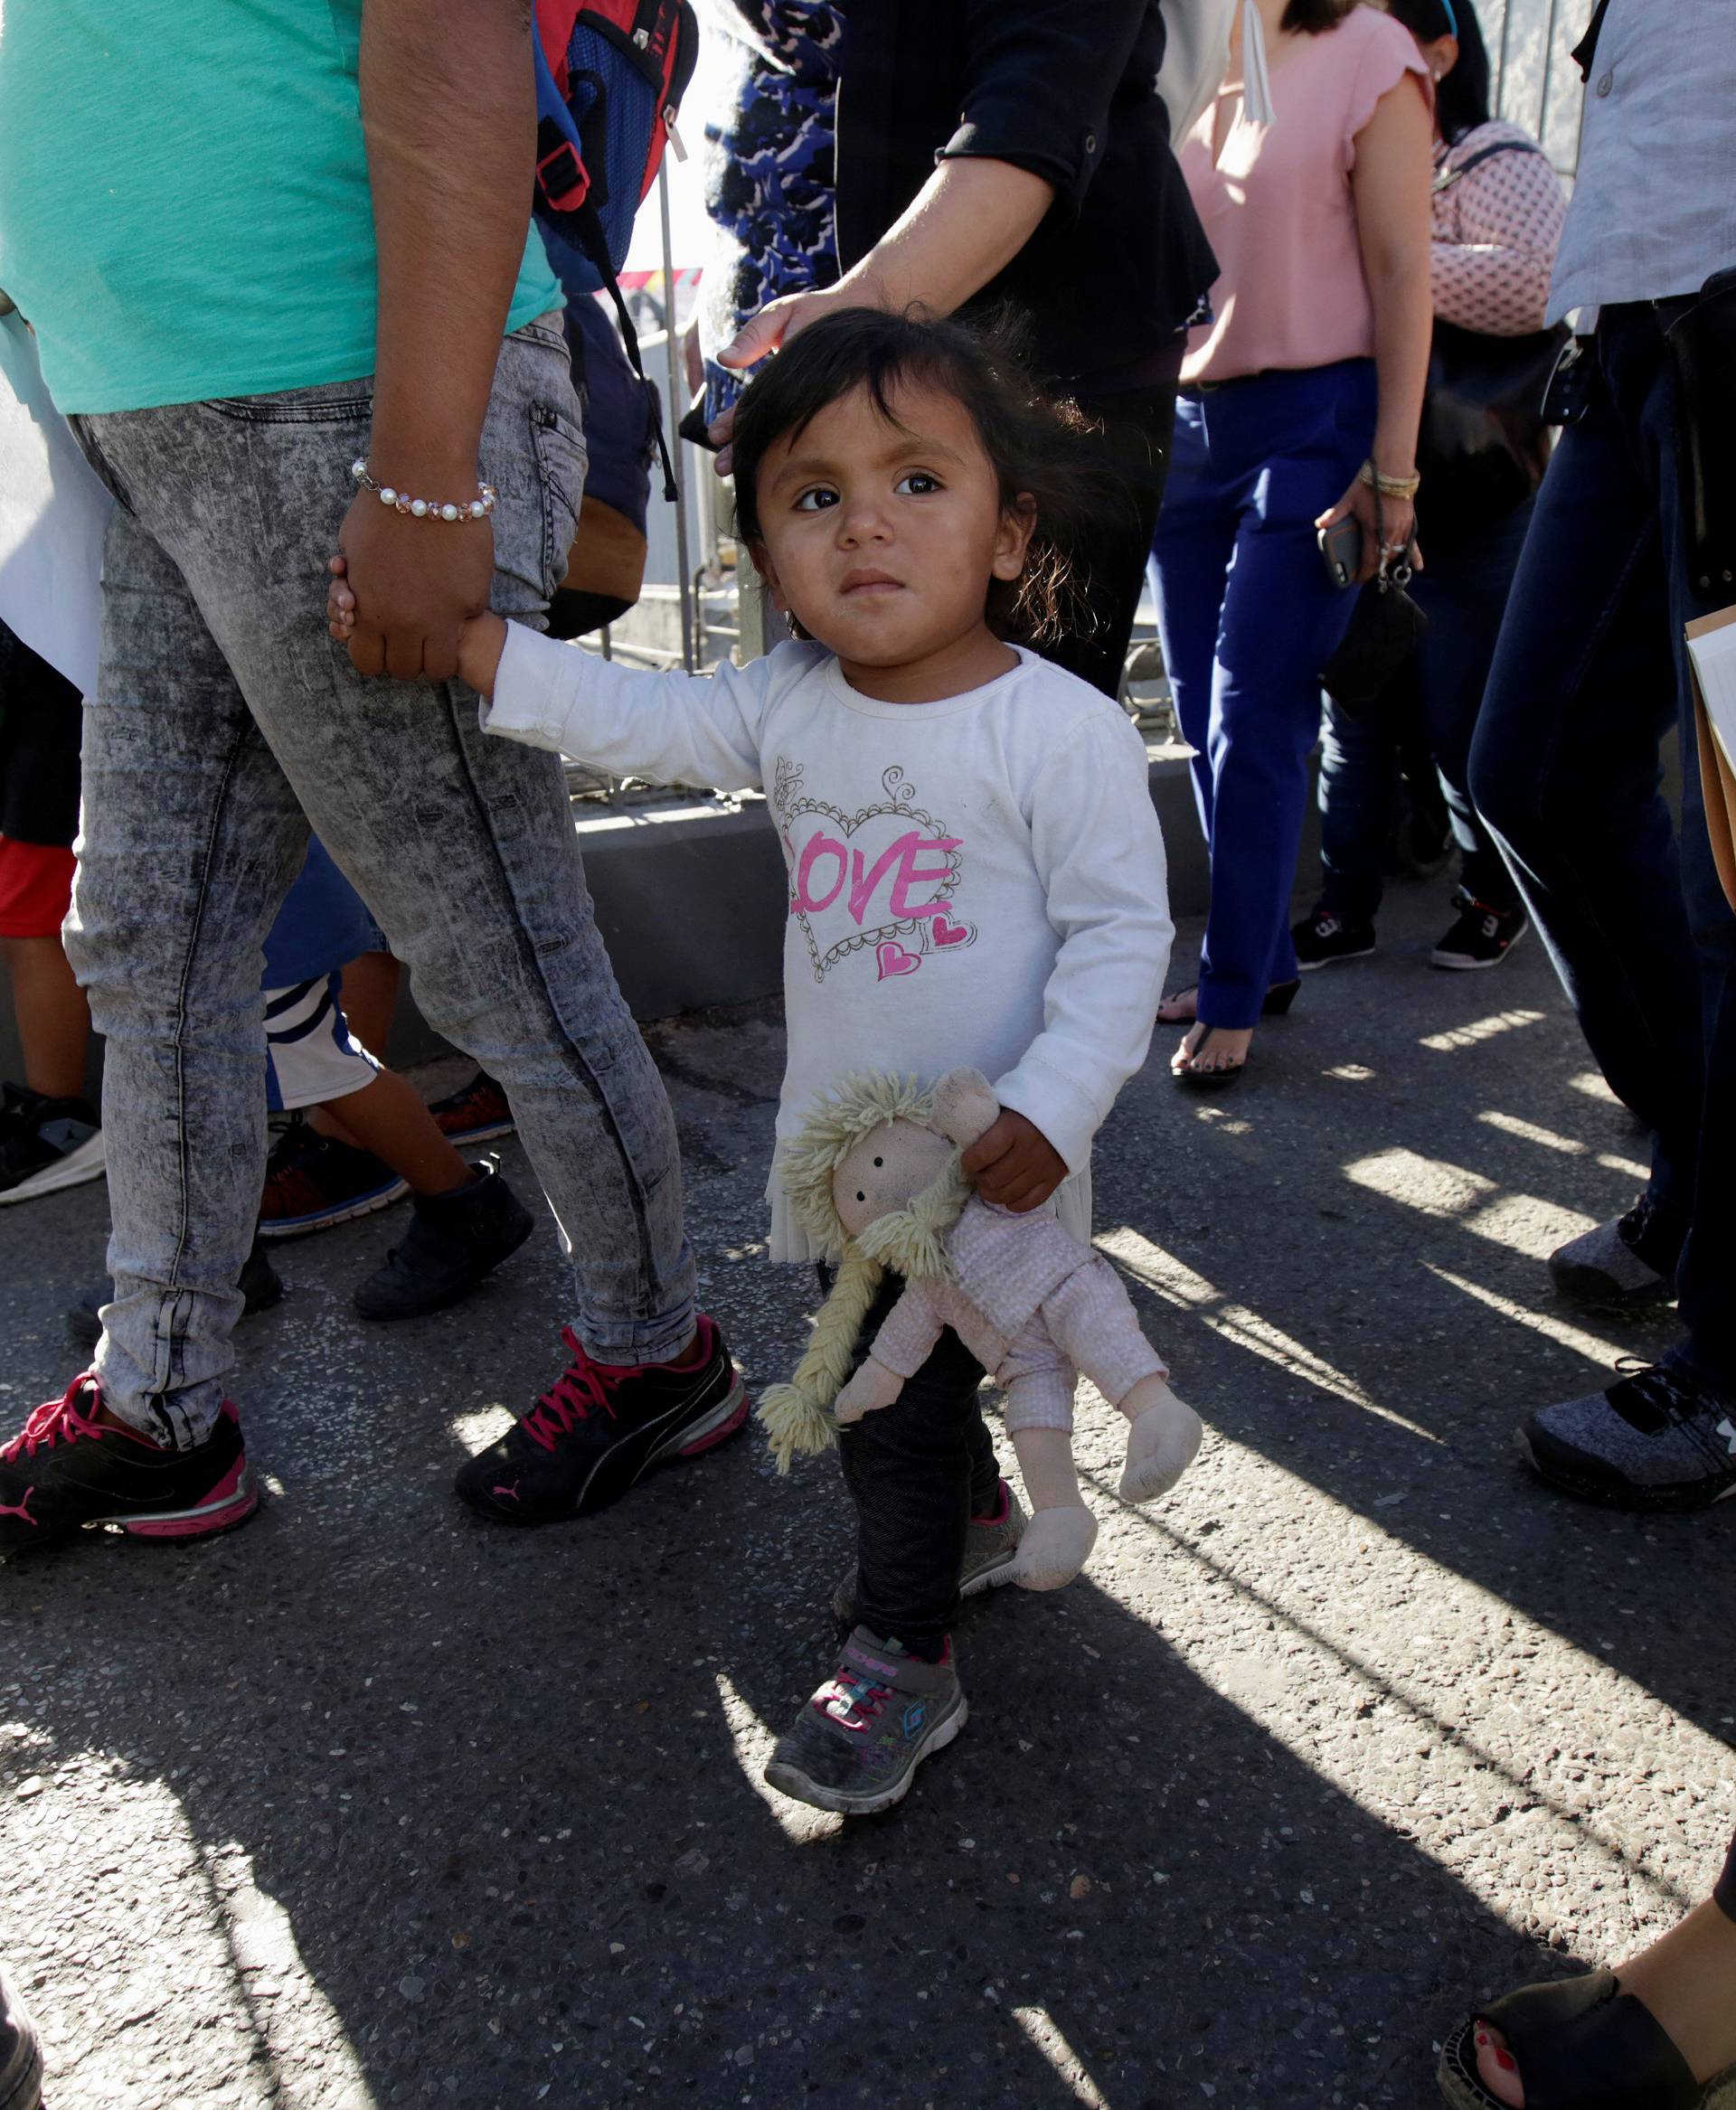 Migrant families from Mexico, fleeing from violence, enter the United States to apply for asylum at Paso del Norte international border crossing bridge in Ciudad Juarez